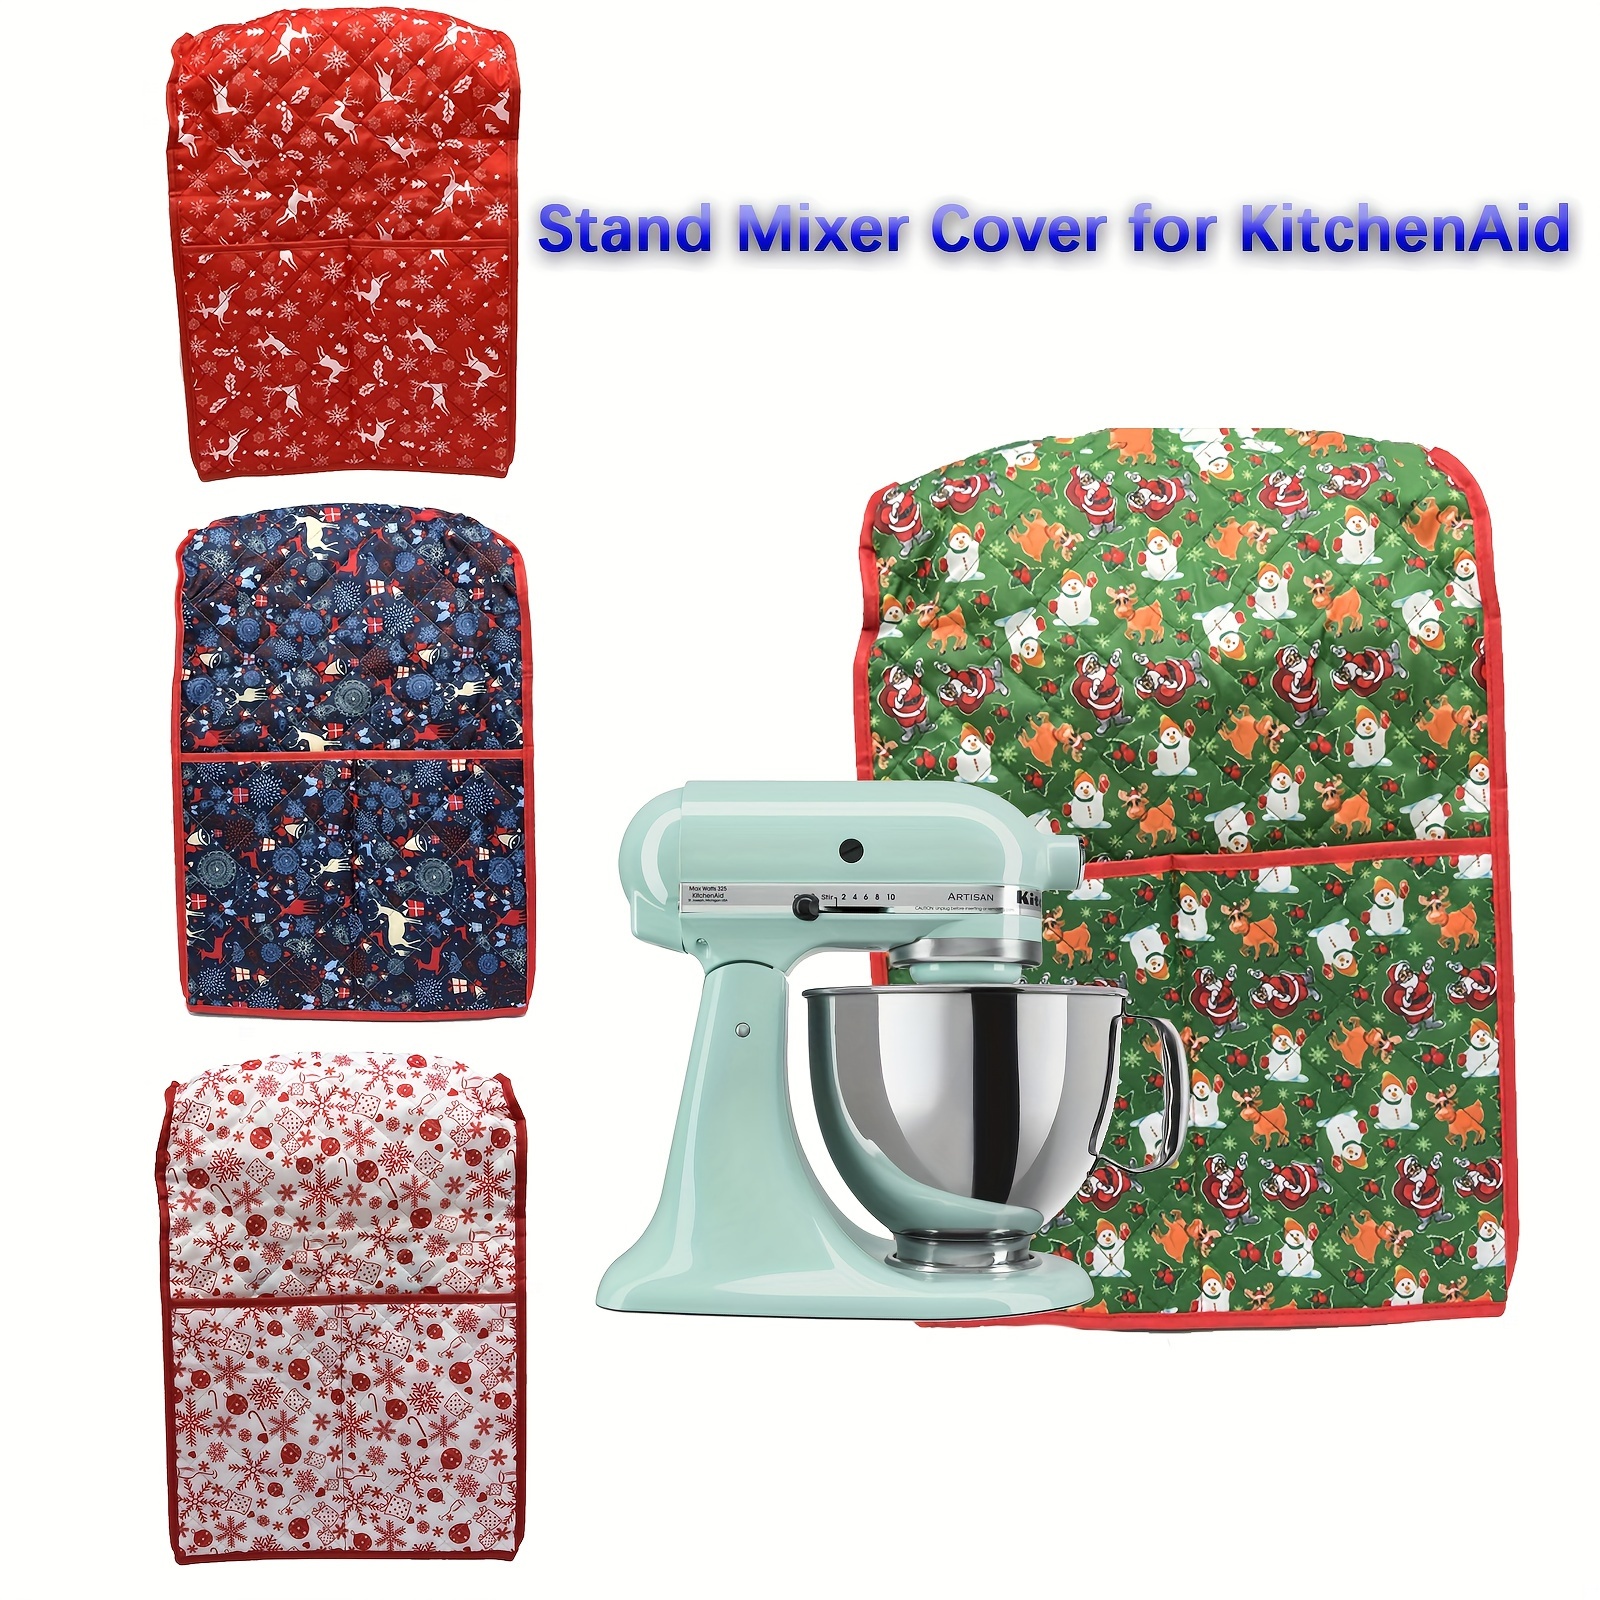 Yarwo Visible Stand Mixer Cover Compatible with 6-8 qt KitchenAid Mixer, Dust Cover with Multiple Pockets for Extra Kitchen Accessories, Red